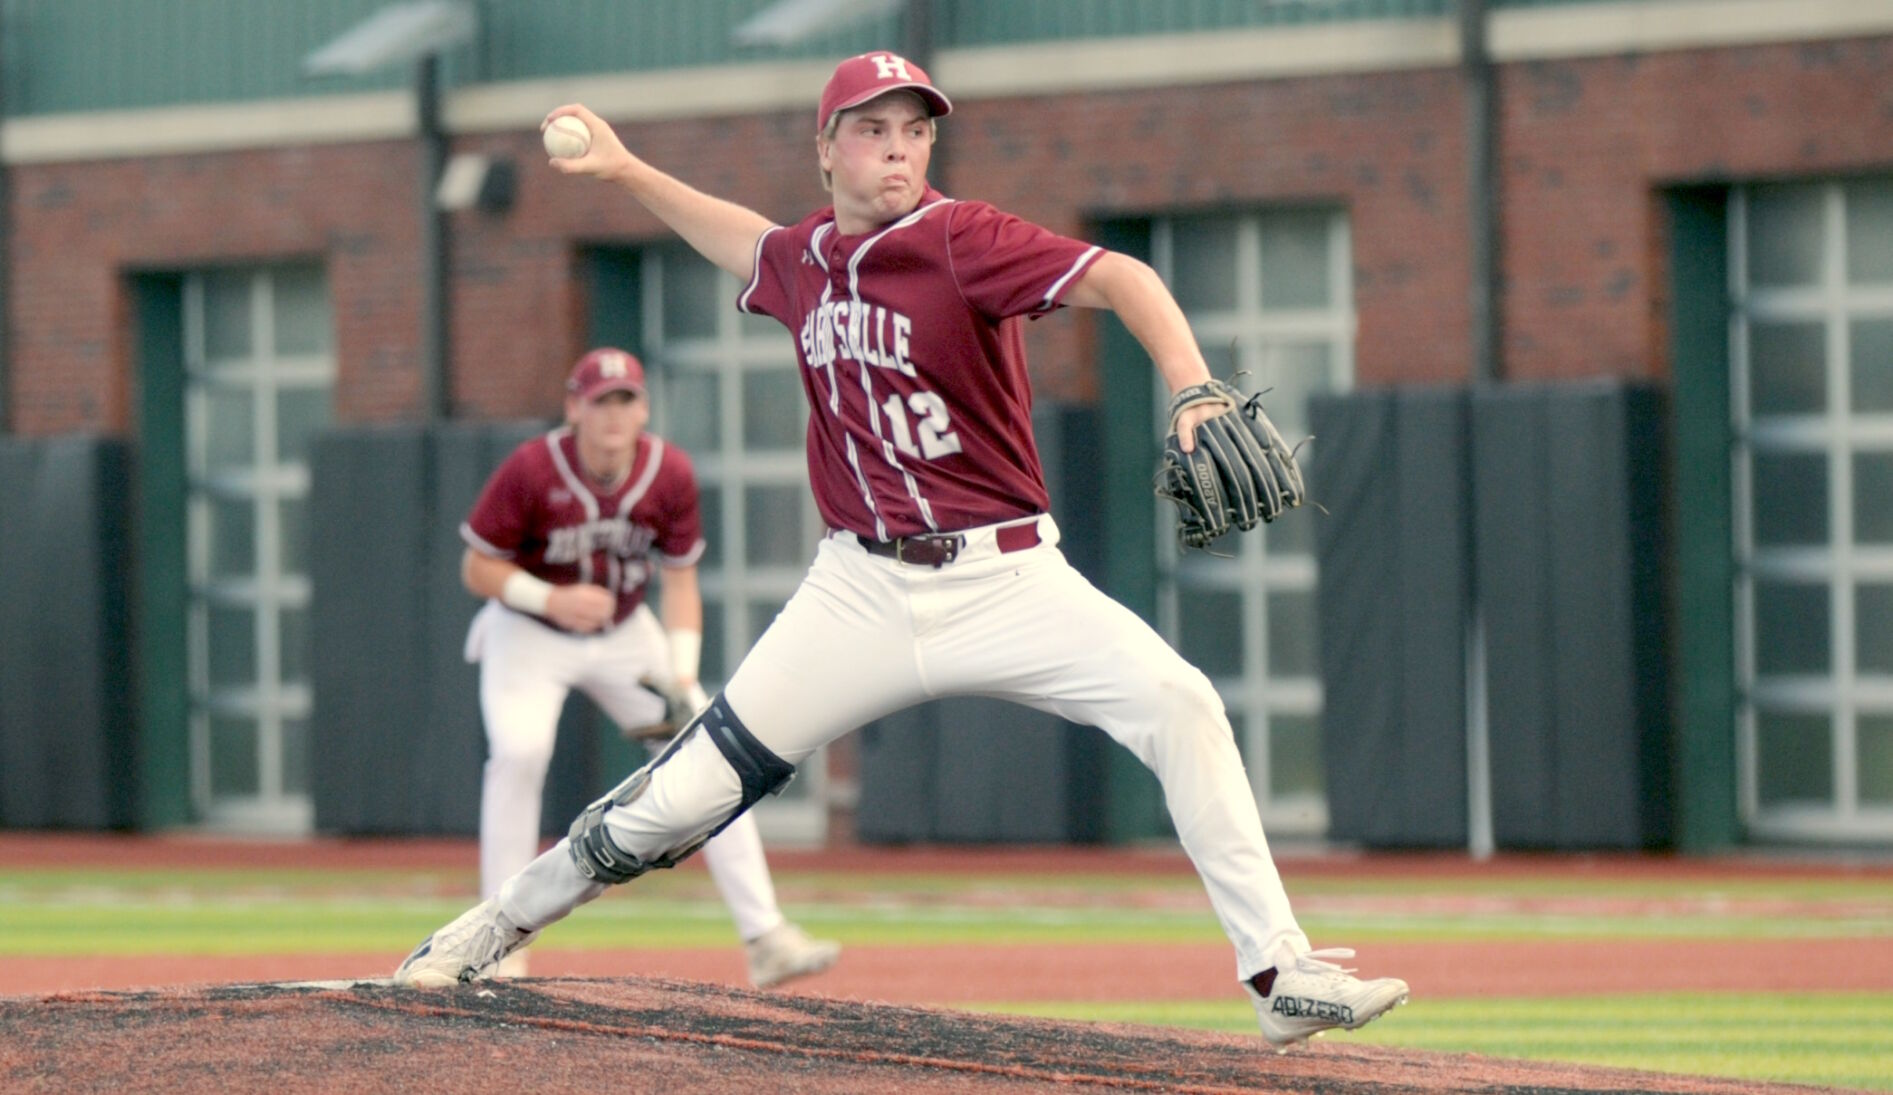 Blackwood’s gem sends Hartselle to state finals for third time in four years